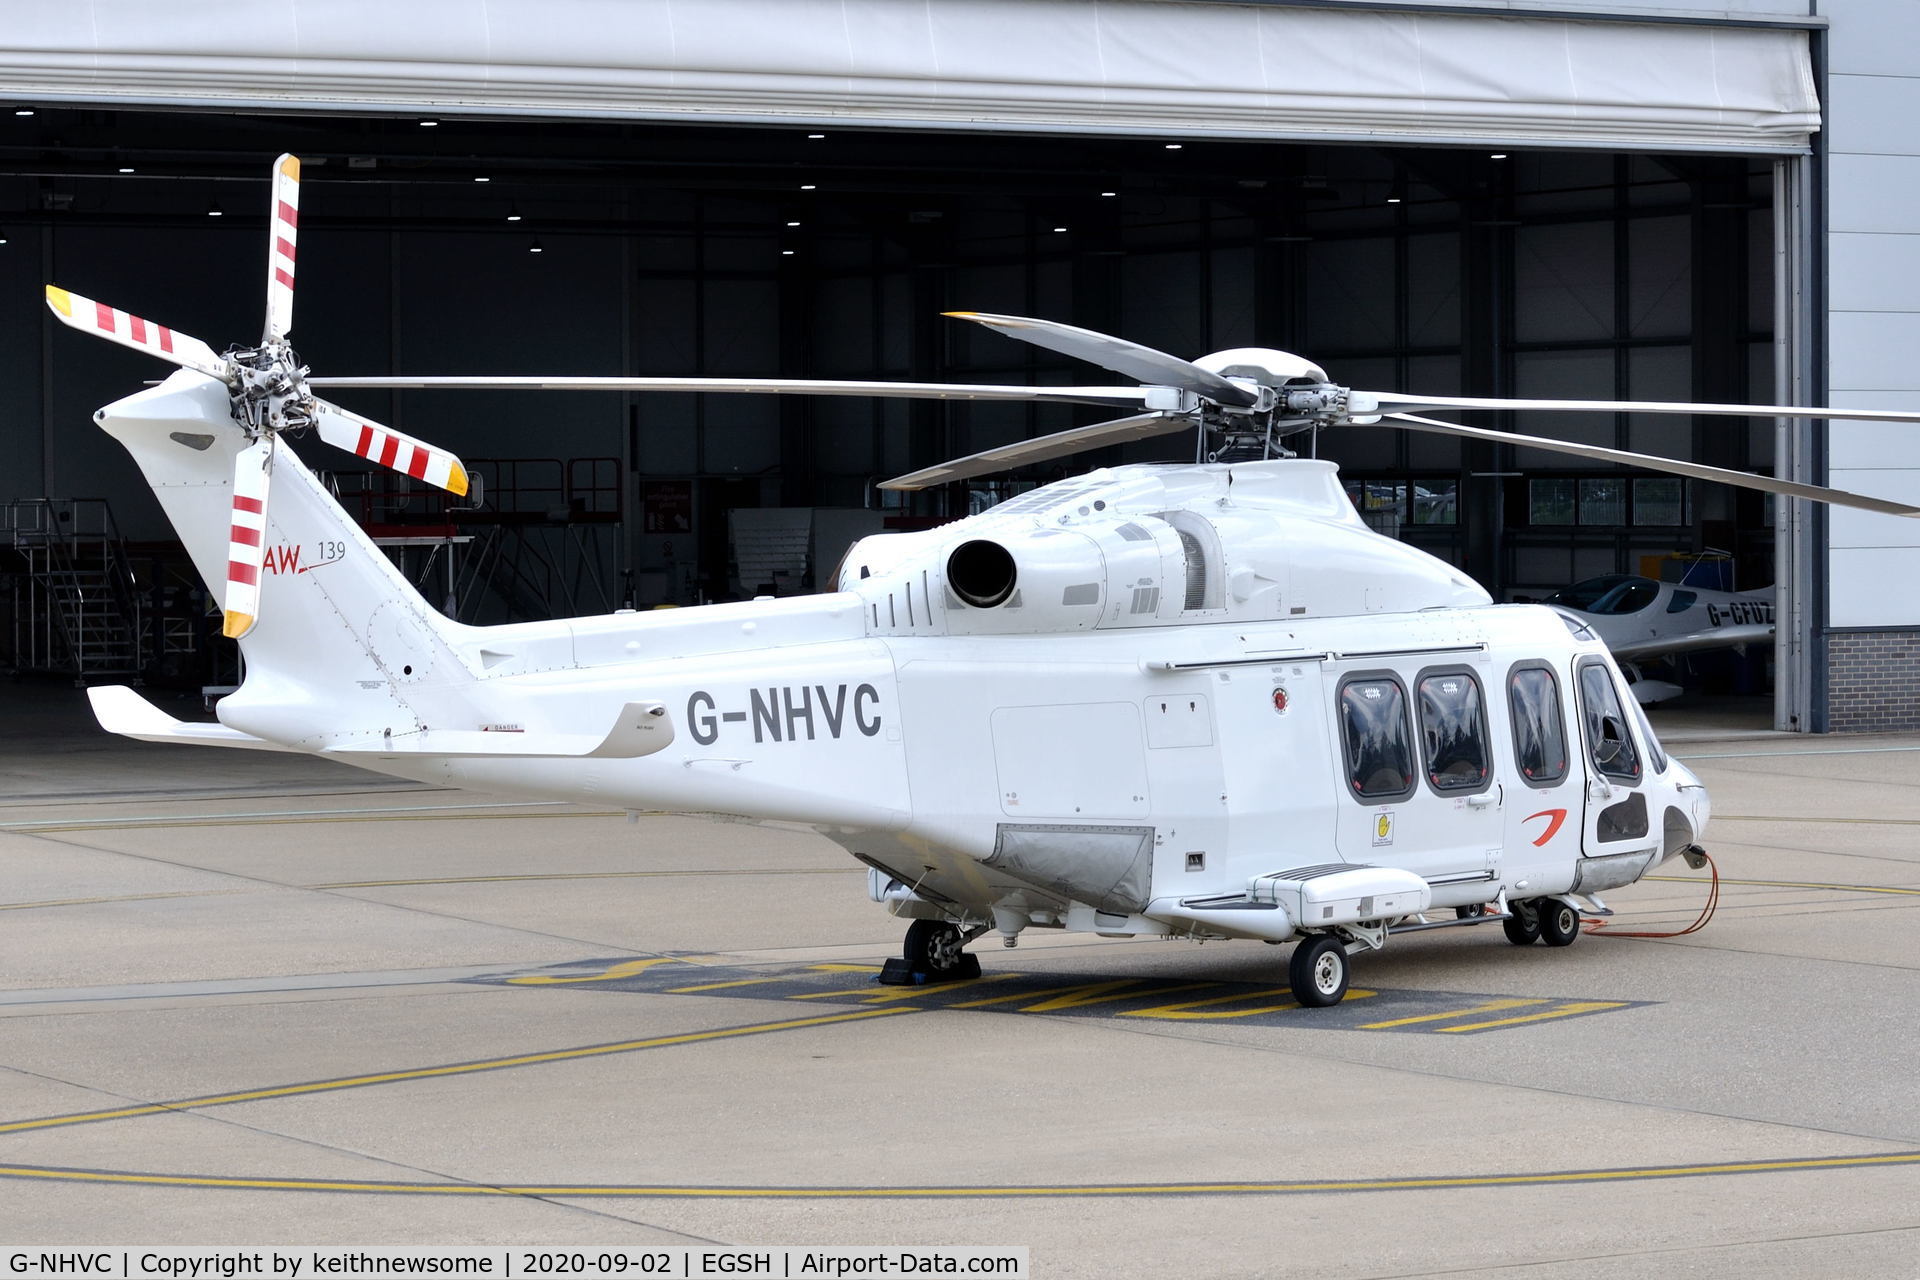 G-NHVC, 2015 AgustaWestland AW-139 C/N 31704, First viewing with UK registration, formerly D-HHXH.